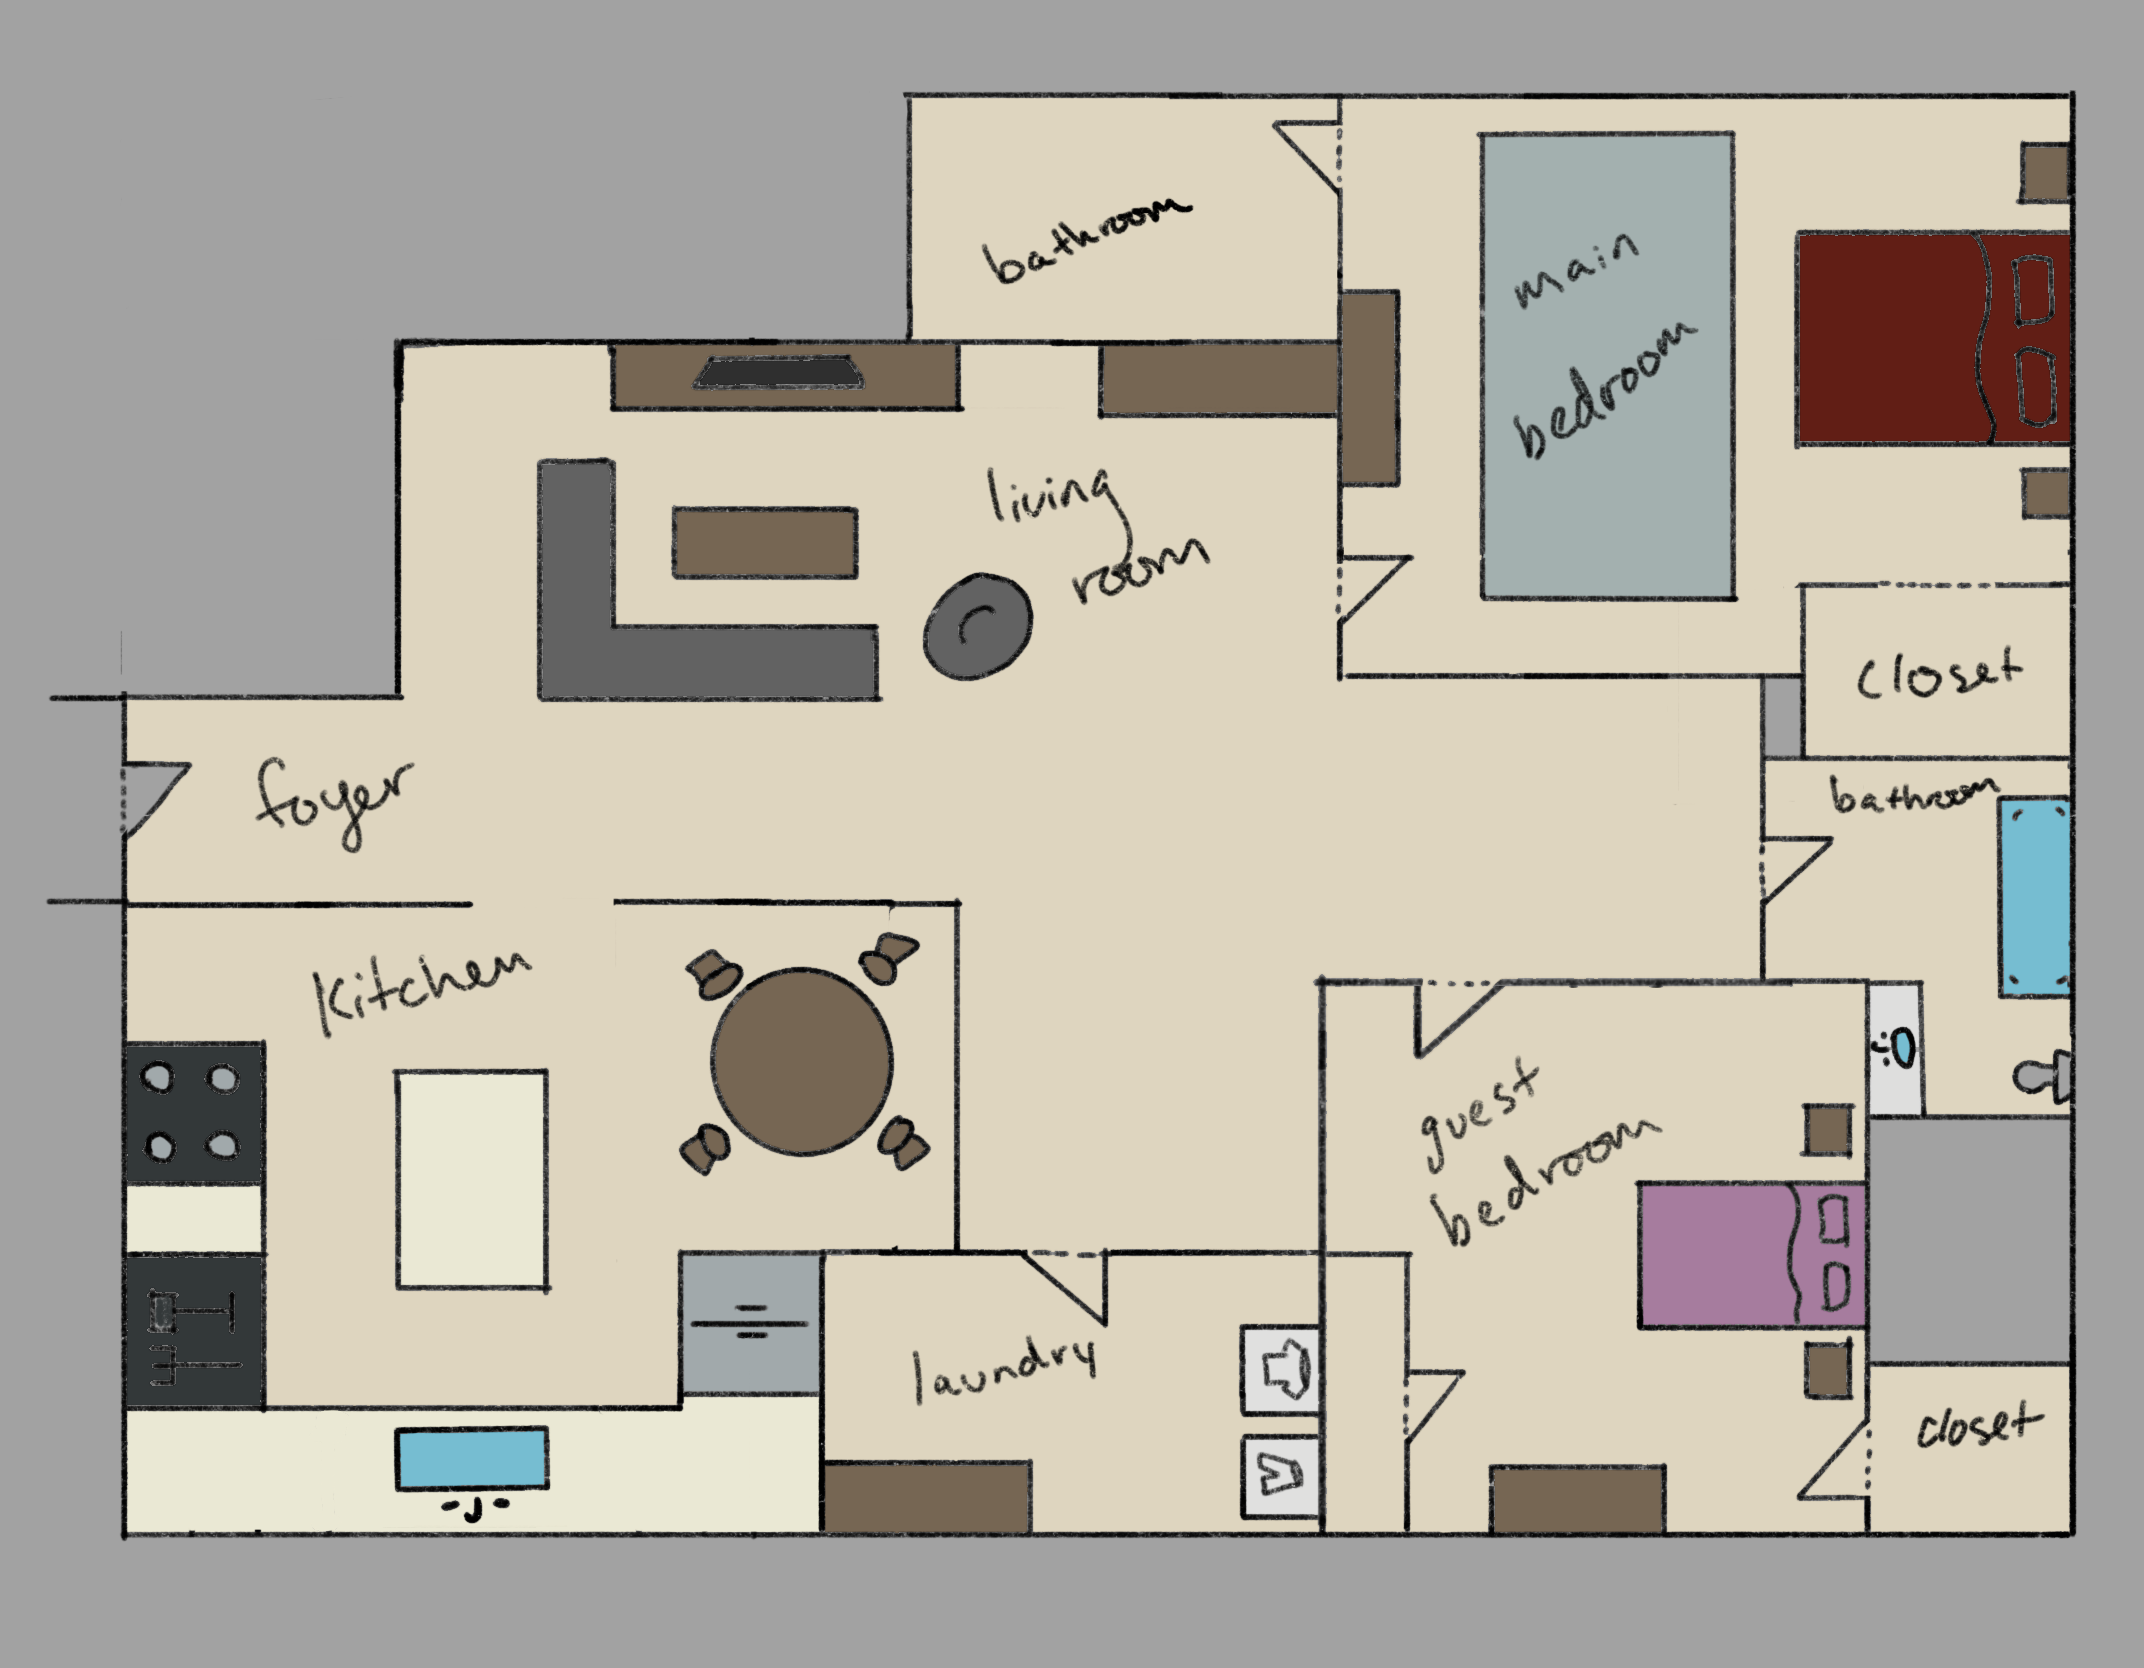 Floor plan layout of a one level apartment. There is an open living room and kitchen on the left side with bedrooms and bathrooms on the right side. Everything is a variety of tan, gray, brown, and black, with a few instances of color to show different beds and sources of water such as bathrooms and sinks.